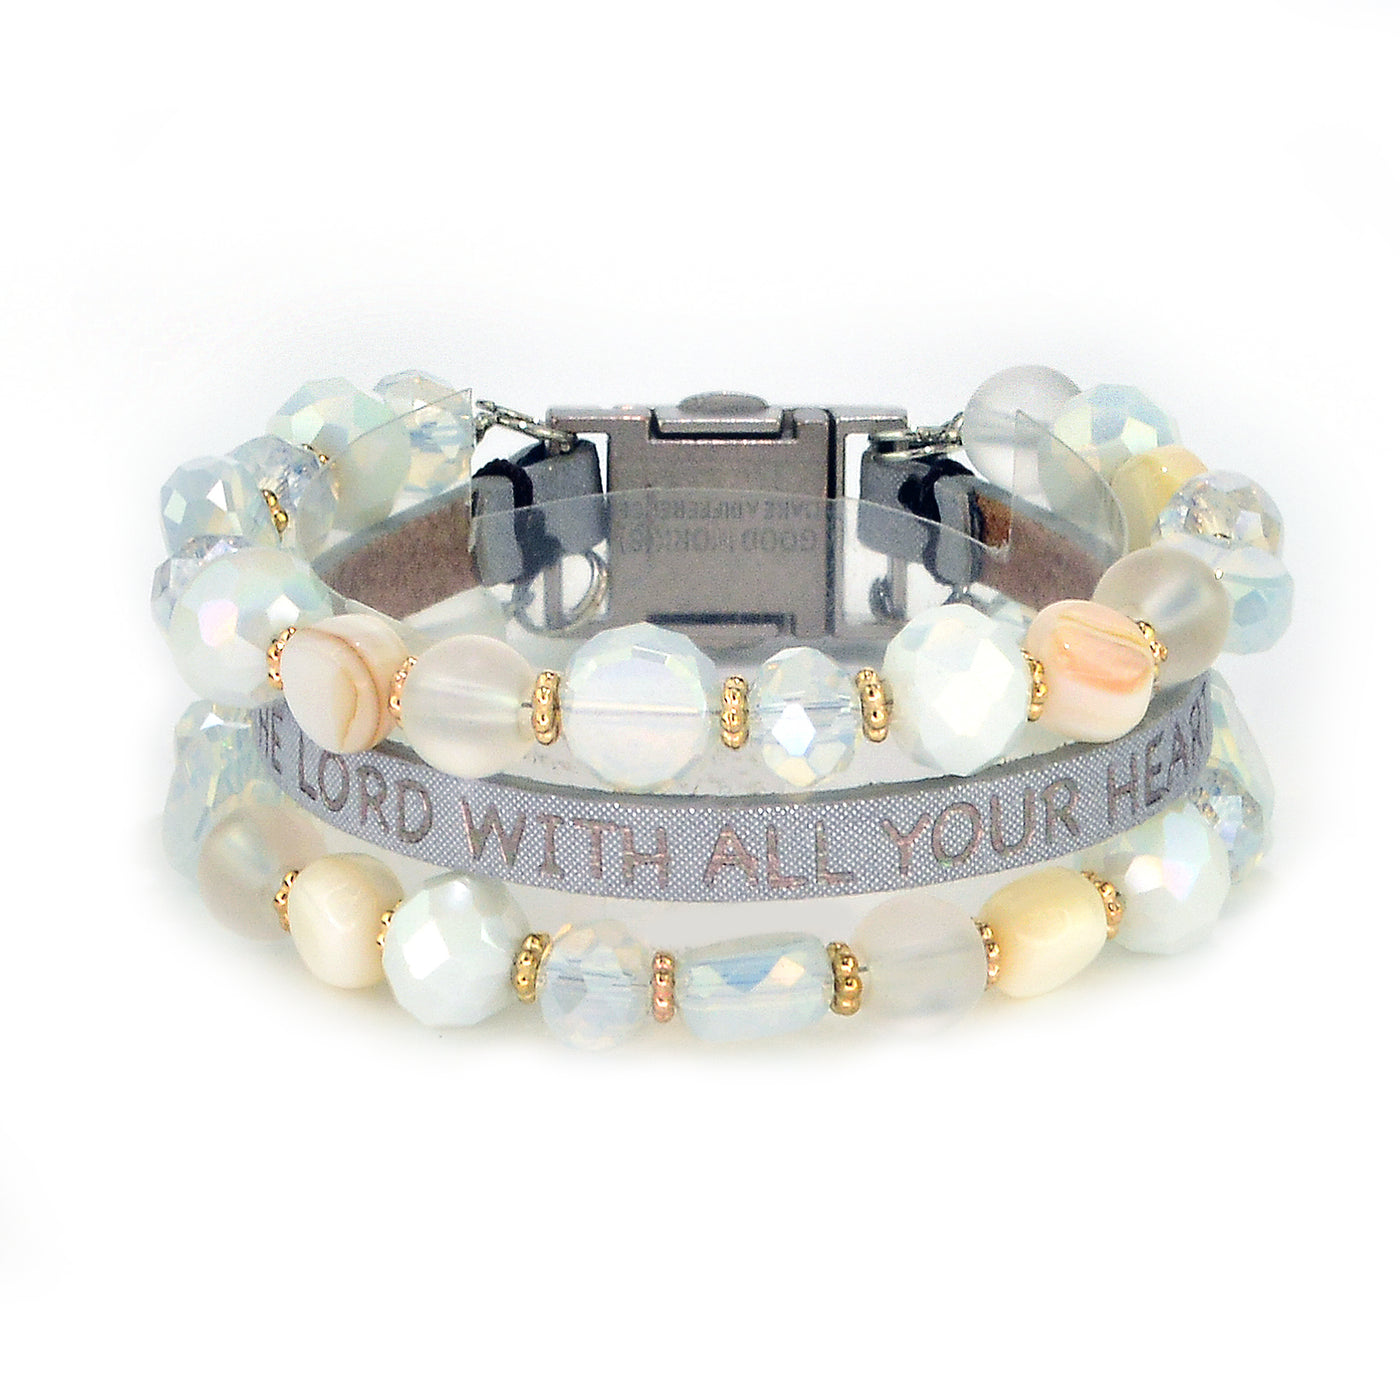 Pure Bible Verse Bracelet-Good Work(s) Make A Difference® | Christian and Inspirational Jewelry Company in Vernon, California